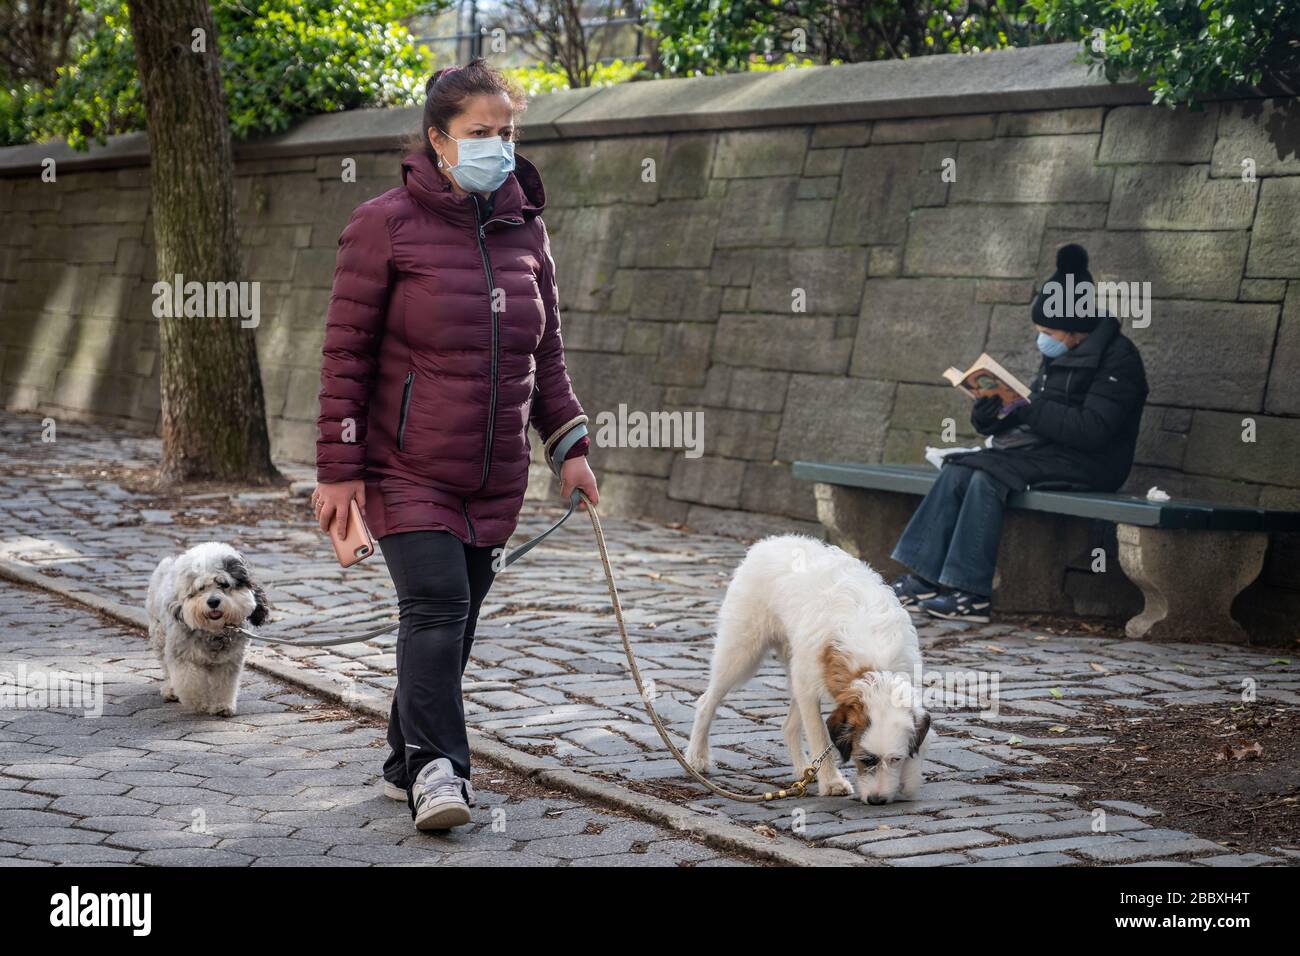 New York, USA. 1st Apr, 2020. People wear face masks and maintain social distancing in New York city during the coronavirus crisis. Credit: Enrique Shore/Alamy Live News Stock Photo